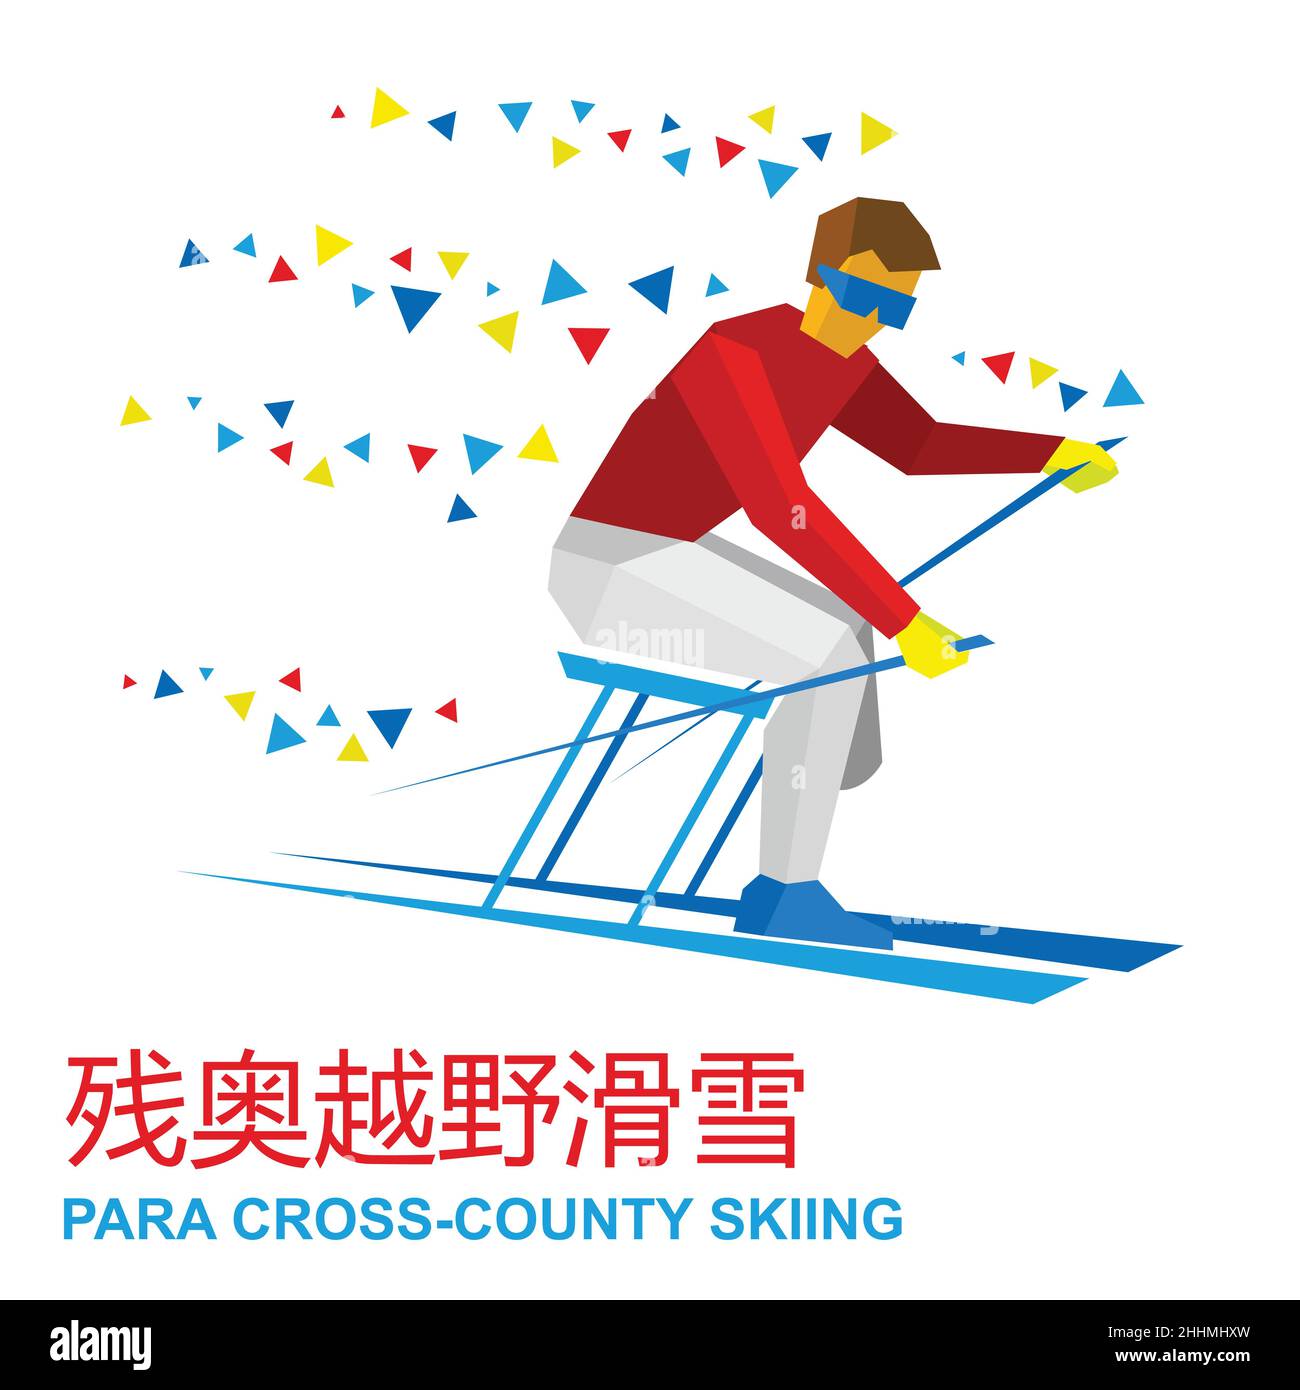 Winter sports - para cross-country skiing. Disabled skier running downhill.  Stock Vector